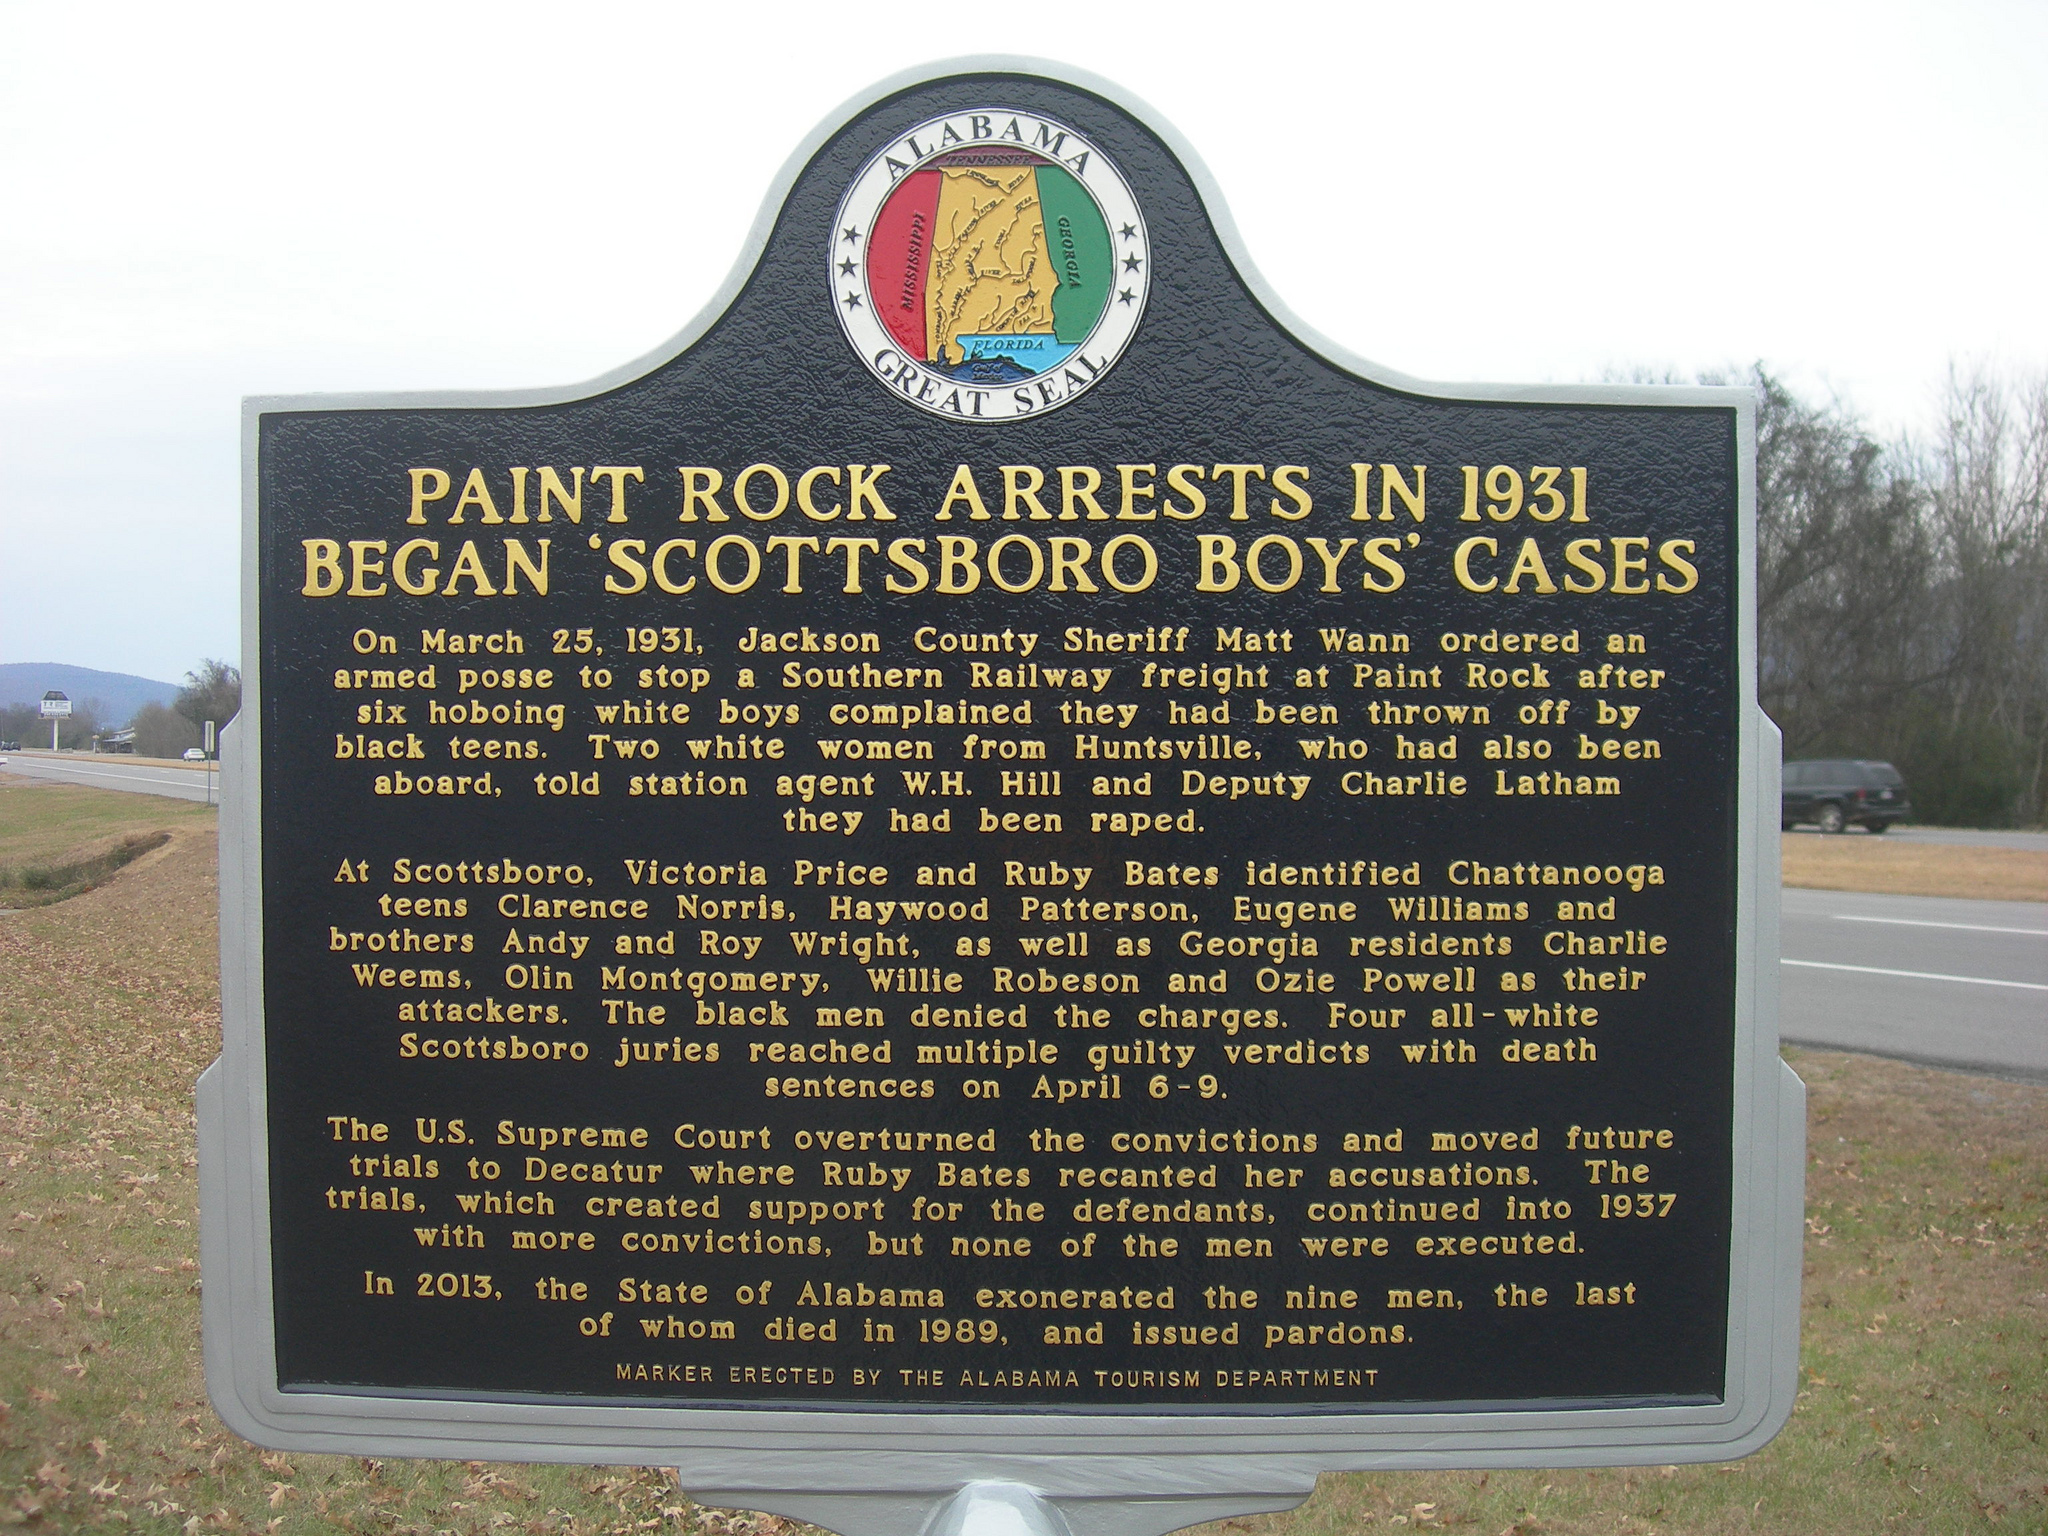 Historic Marker Located in front of town hall in Paint Rock, Alabama. Erected in November 2013.Credit: Jimmy Emerson DVM CC BY-NC-ND 2.0